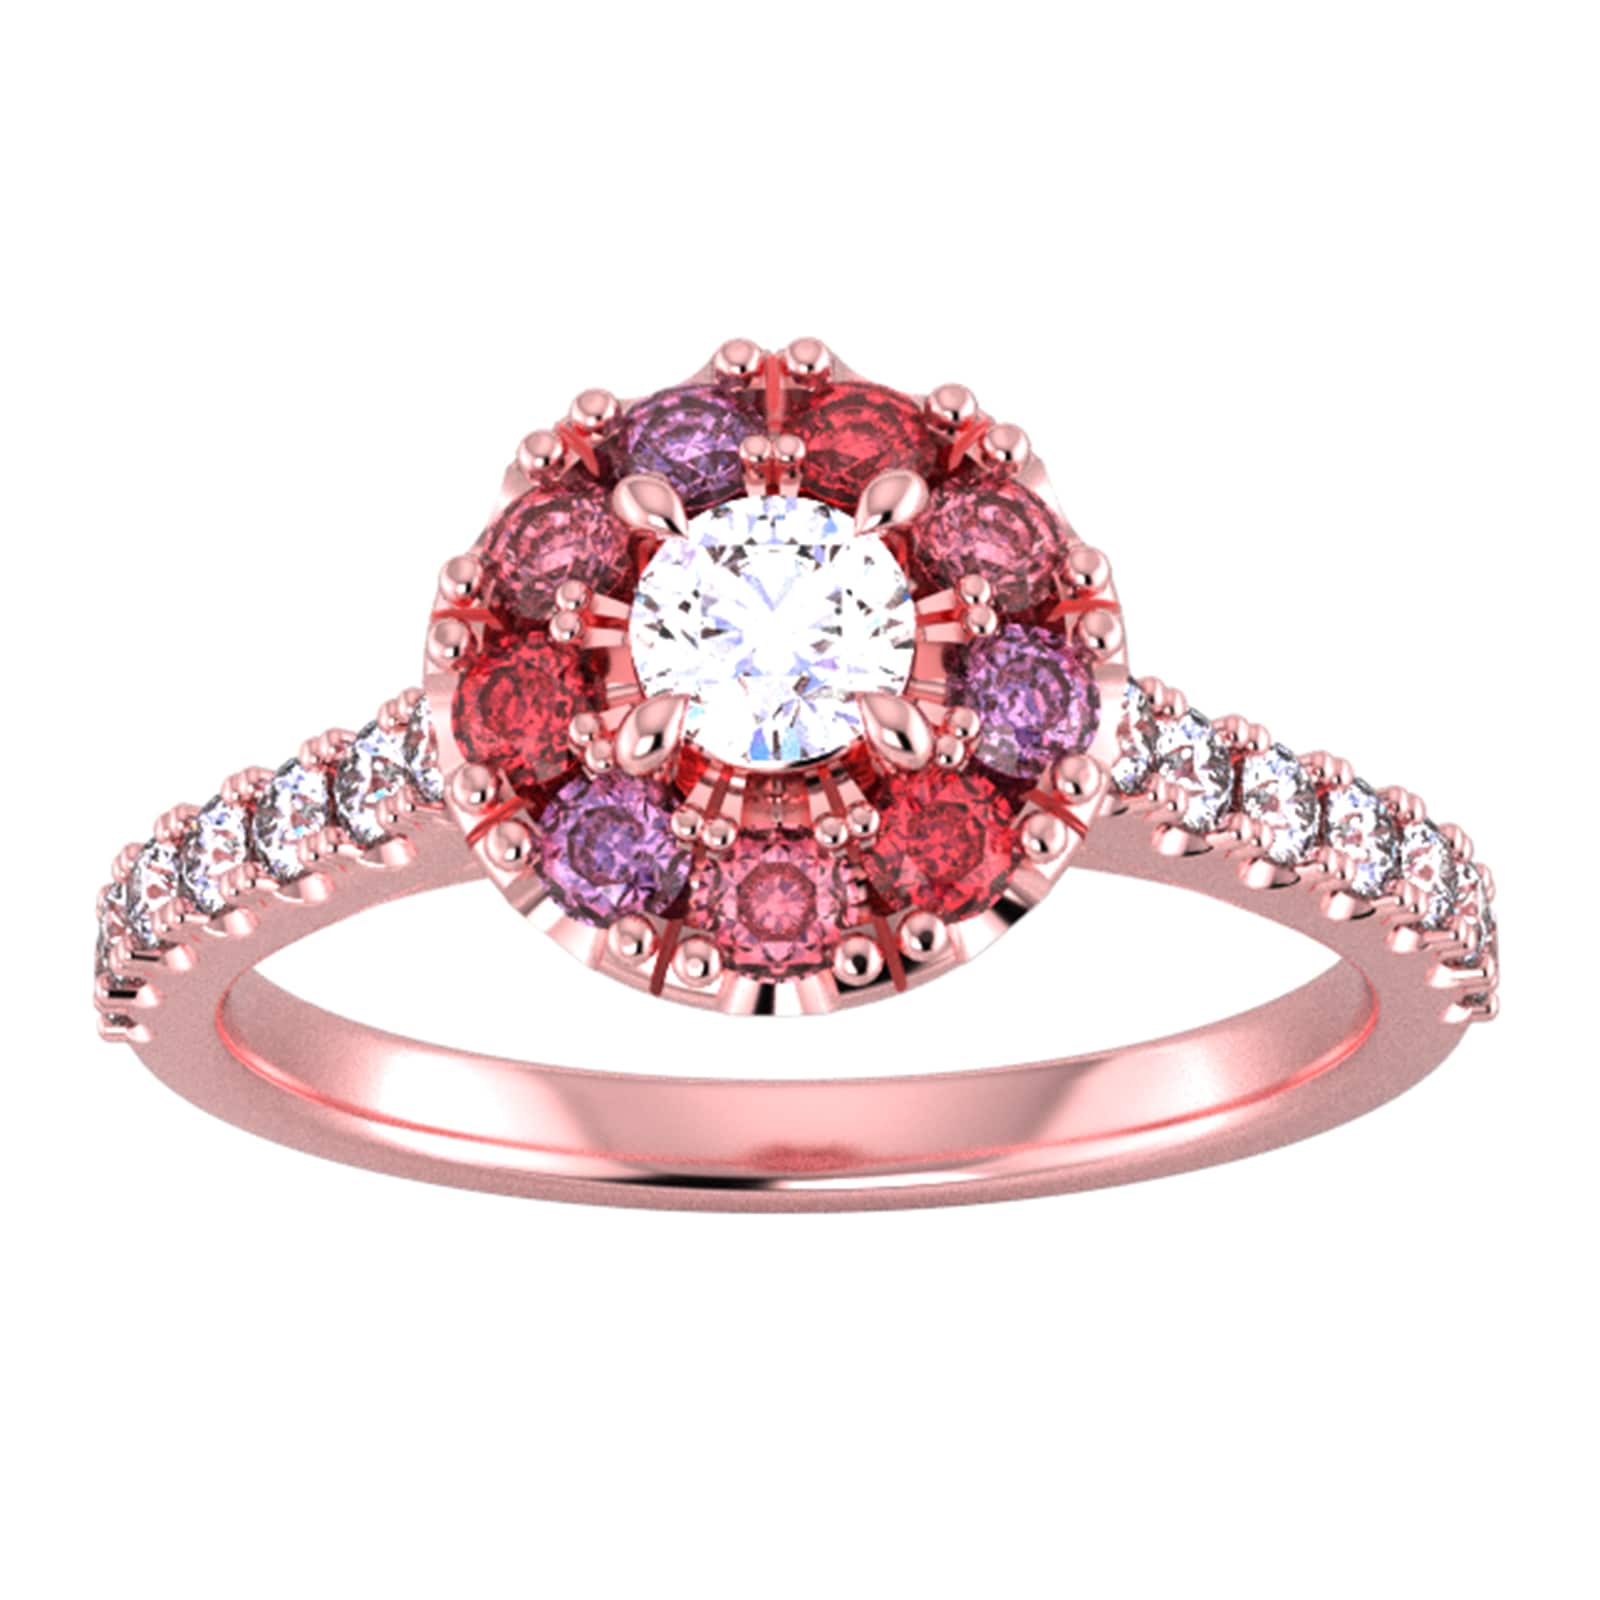 9ct Rose Gold Diamond & Red, Pink, Purple Sapphire Halo Ring - Ring Size M.5